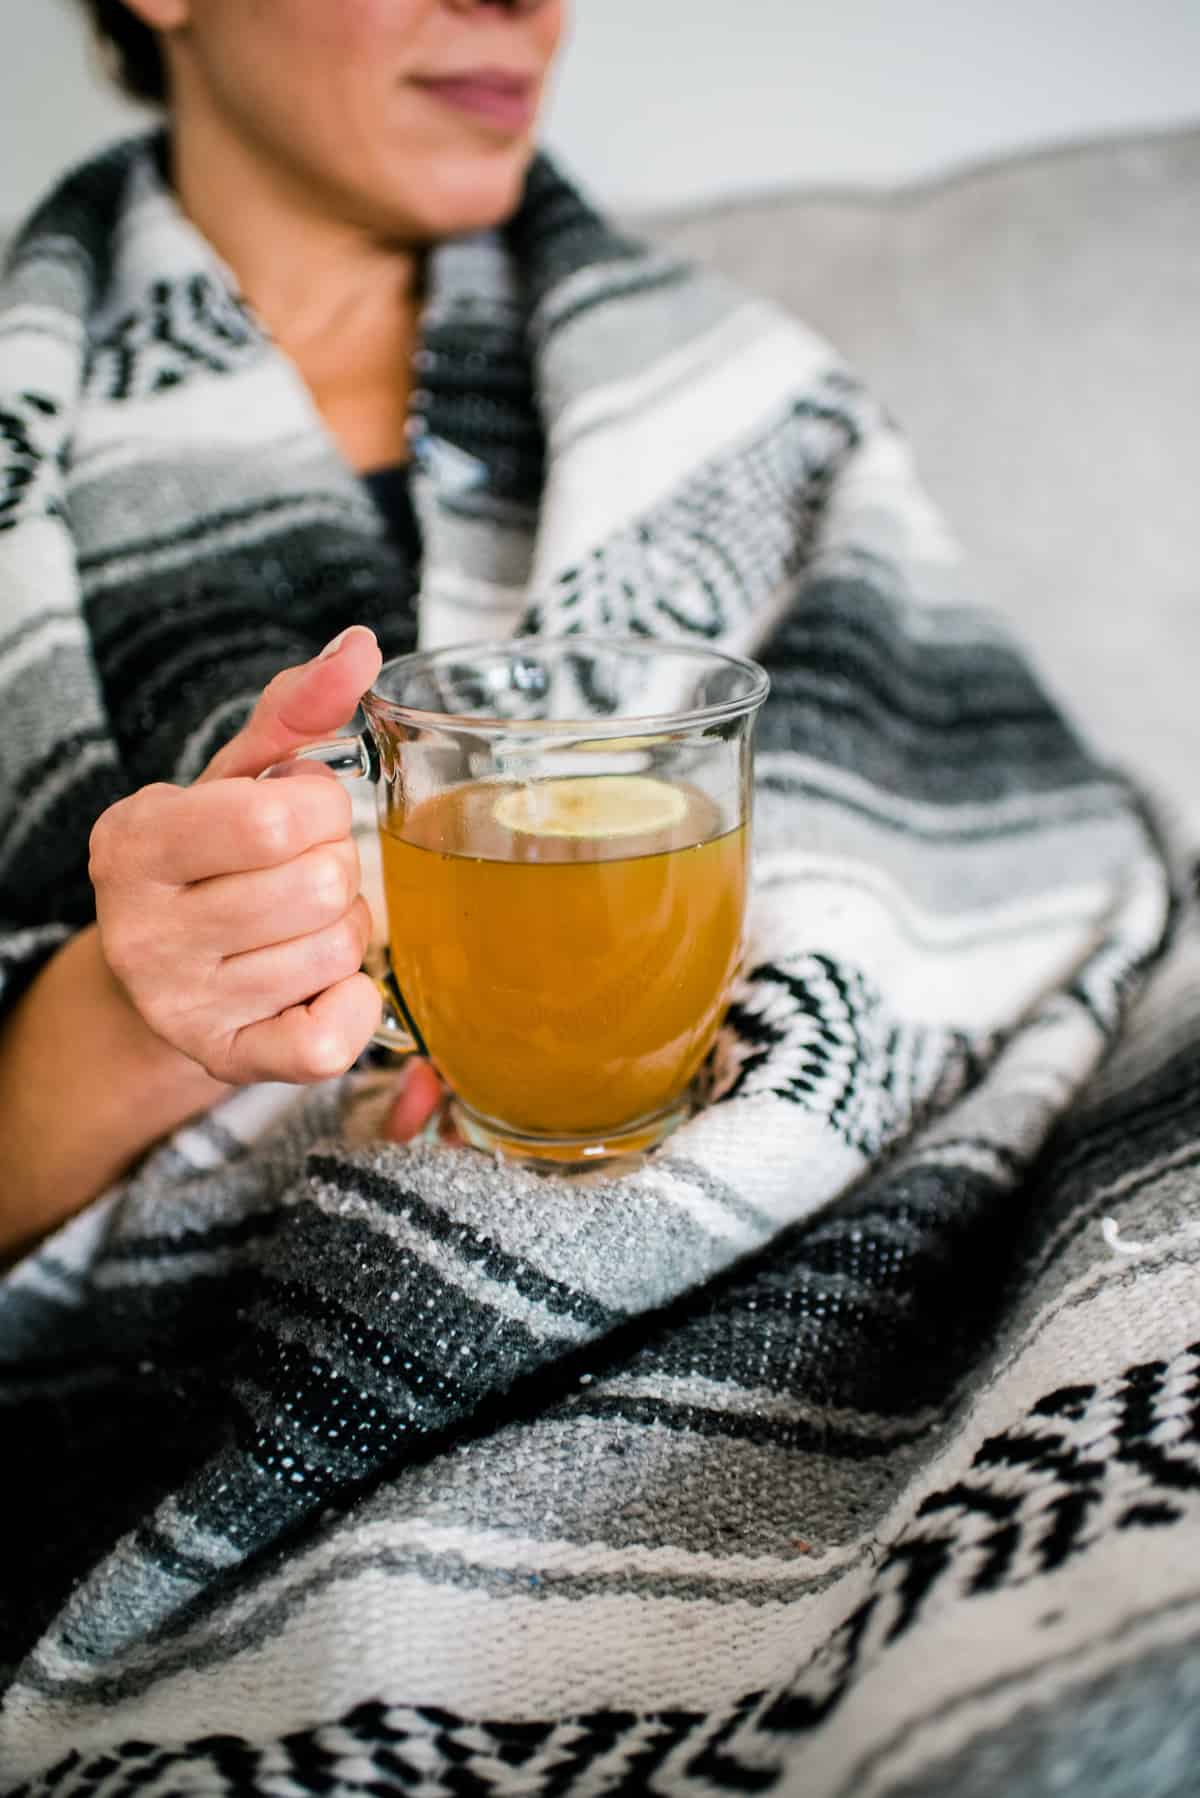 Latina woman wrapped in a grey, white, and black striped blanket holding a mug of Mexican oregano tea with a slice of lime.